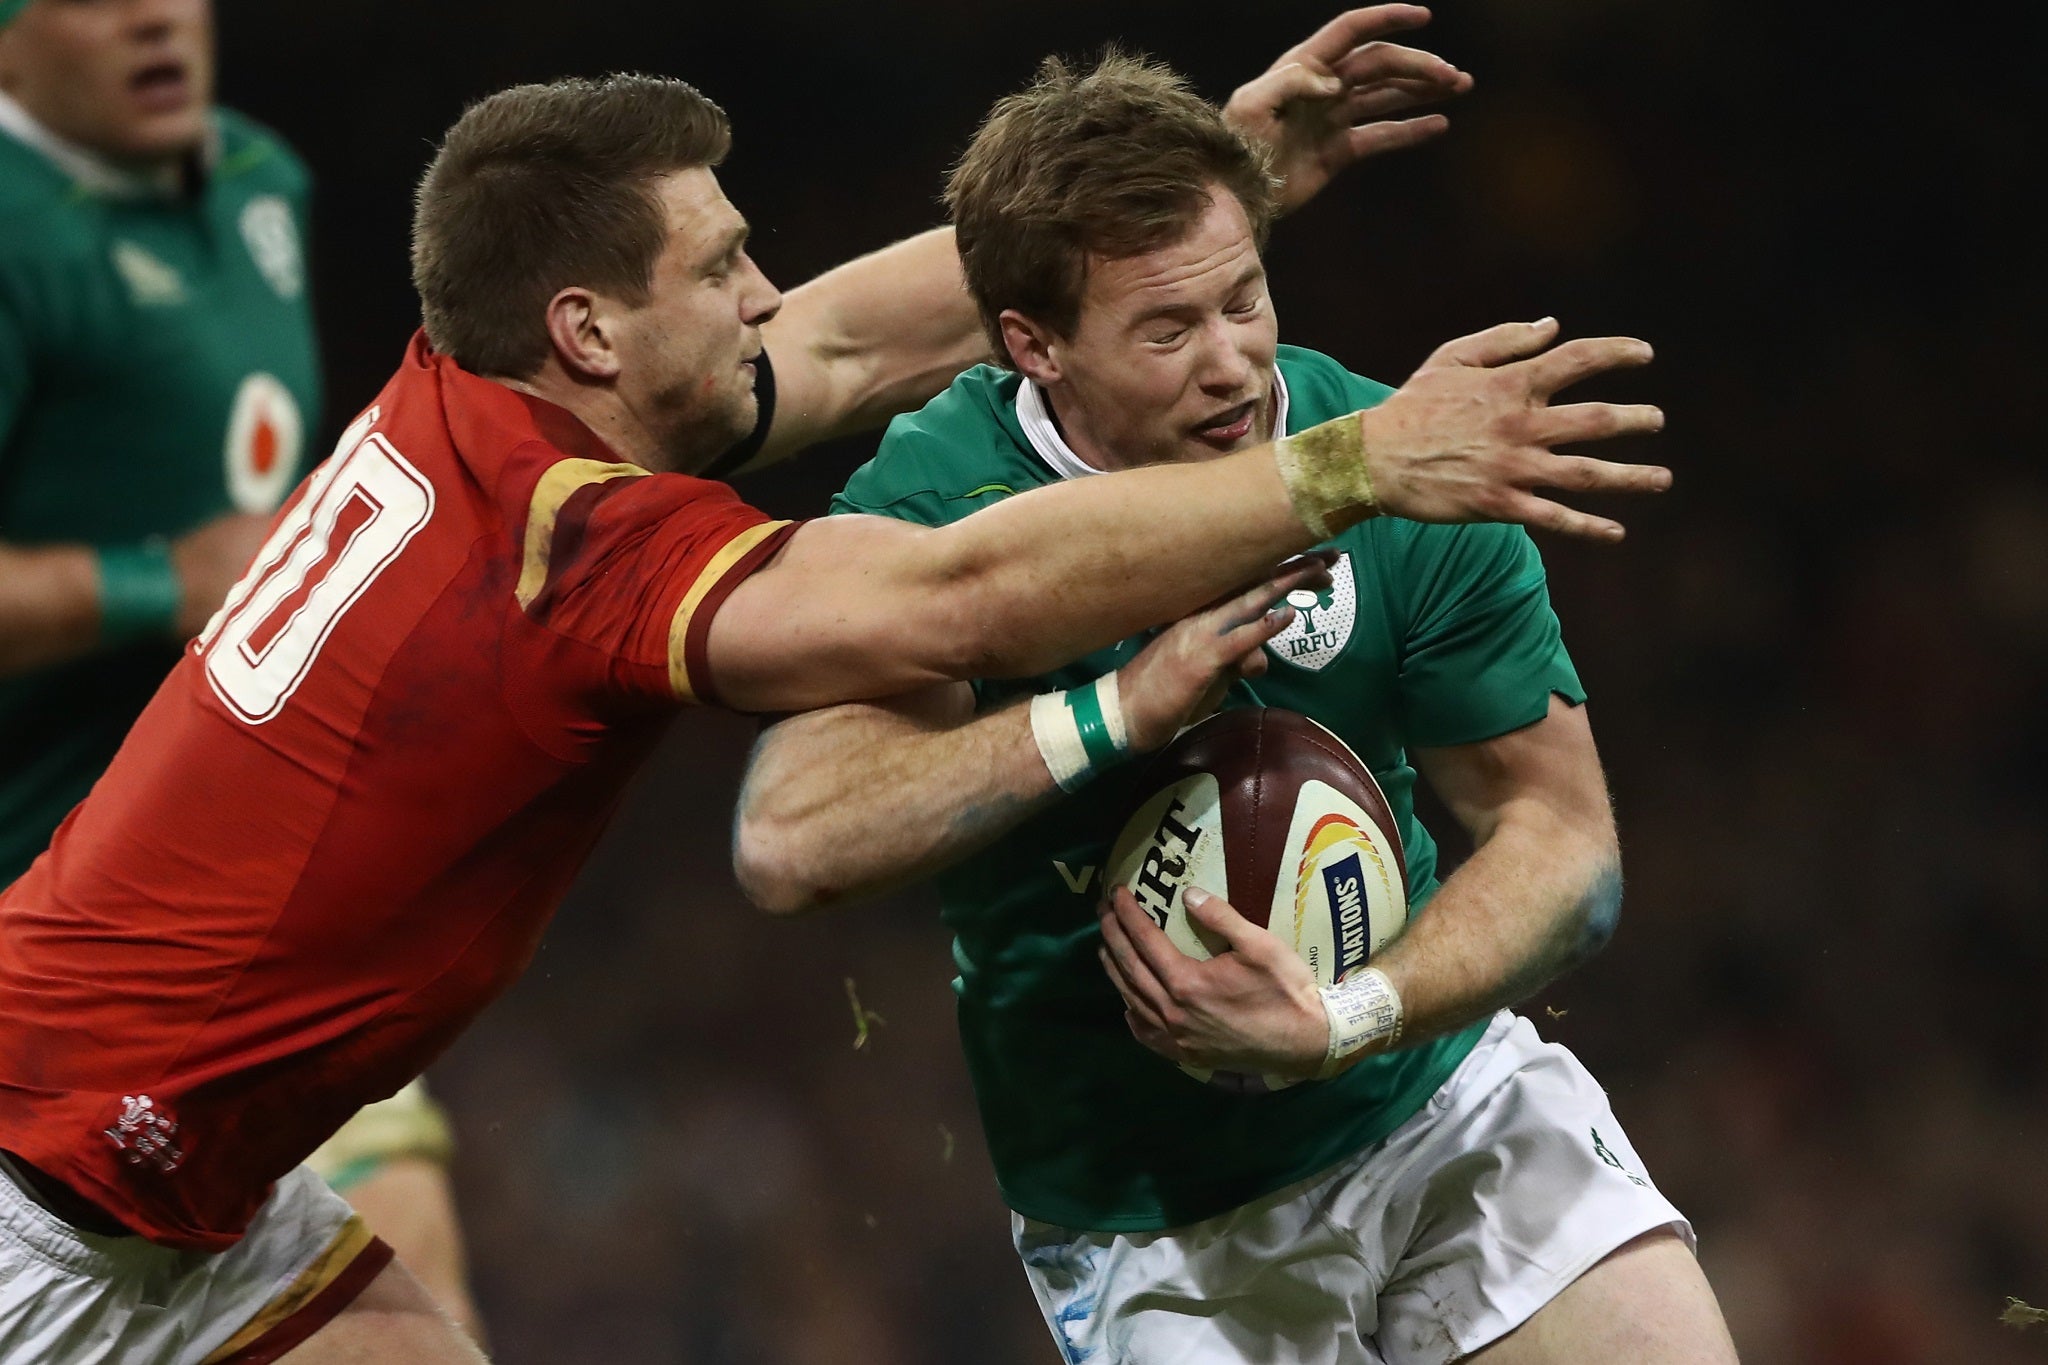 Marmion displayed his talents in the defeat by Wales